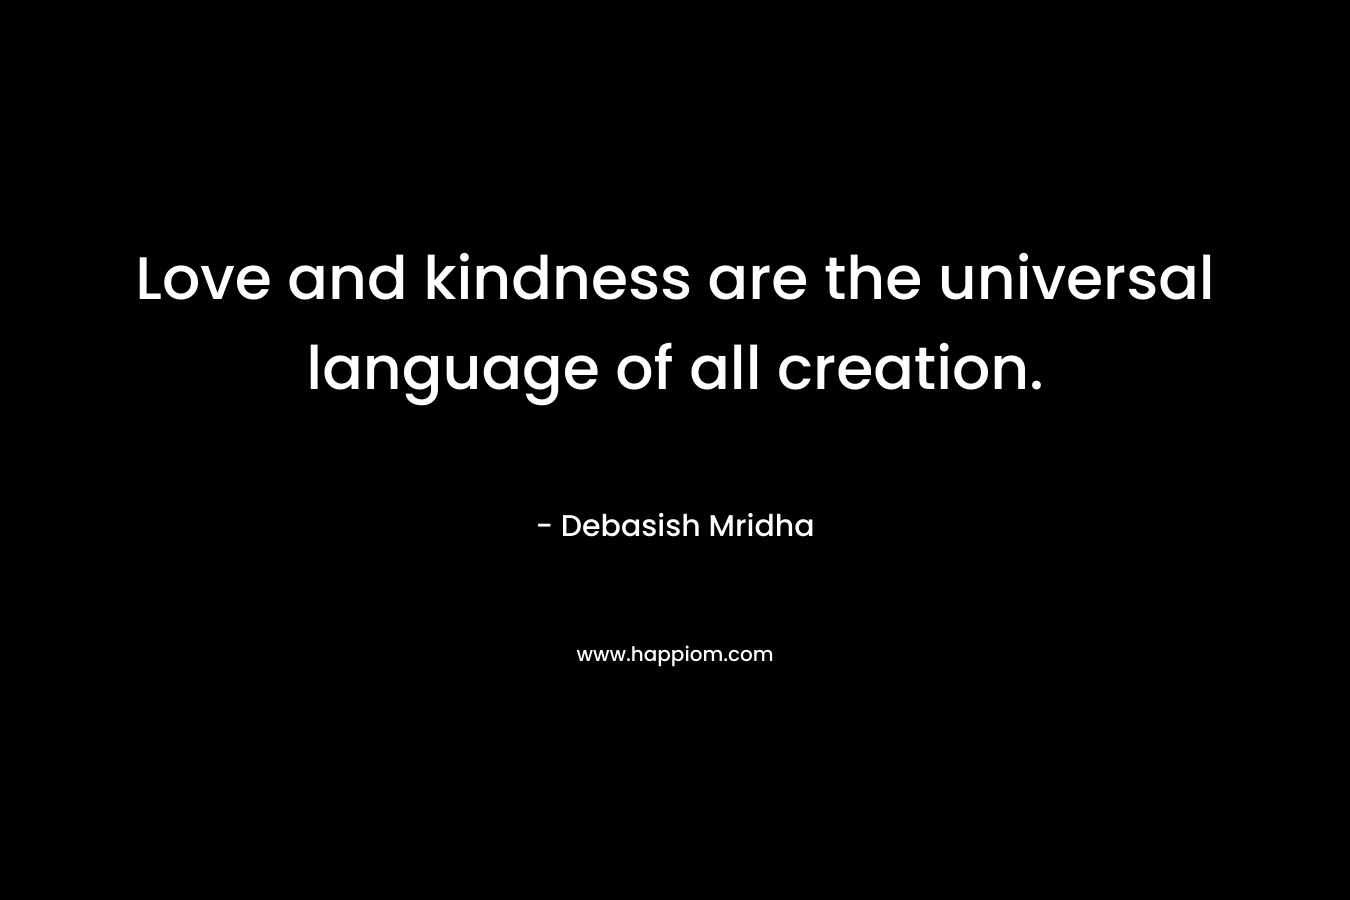 Love and kindness are the universal language of all creation.